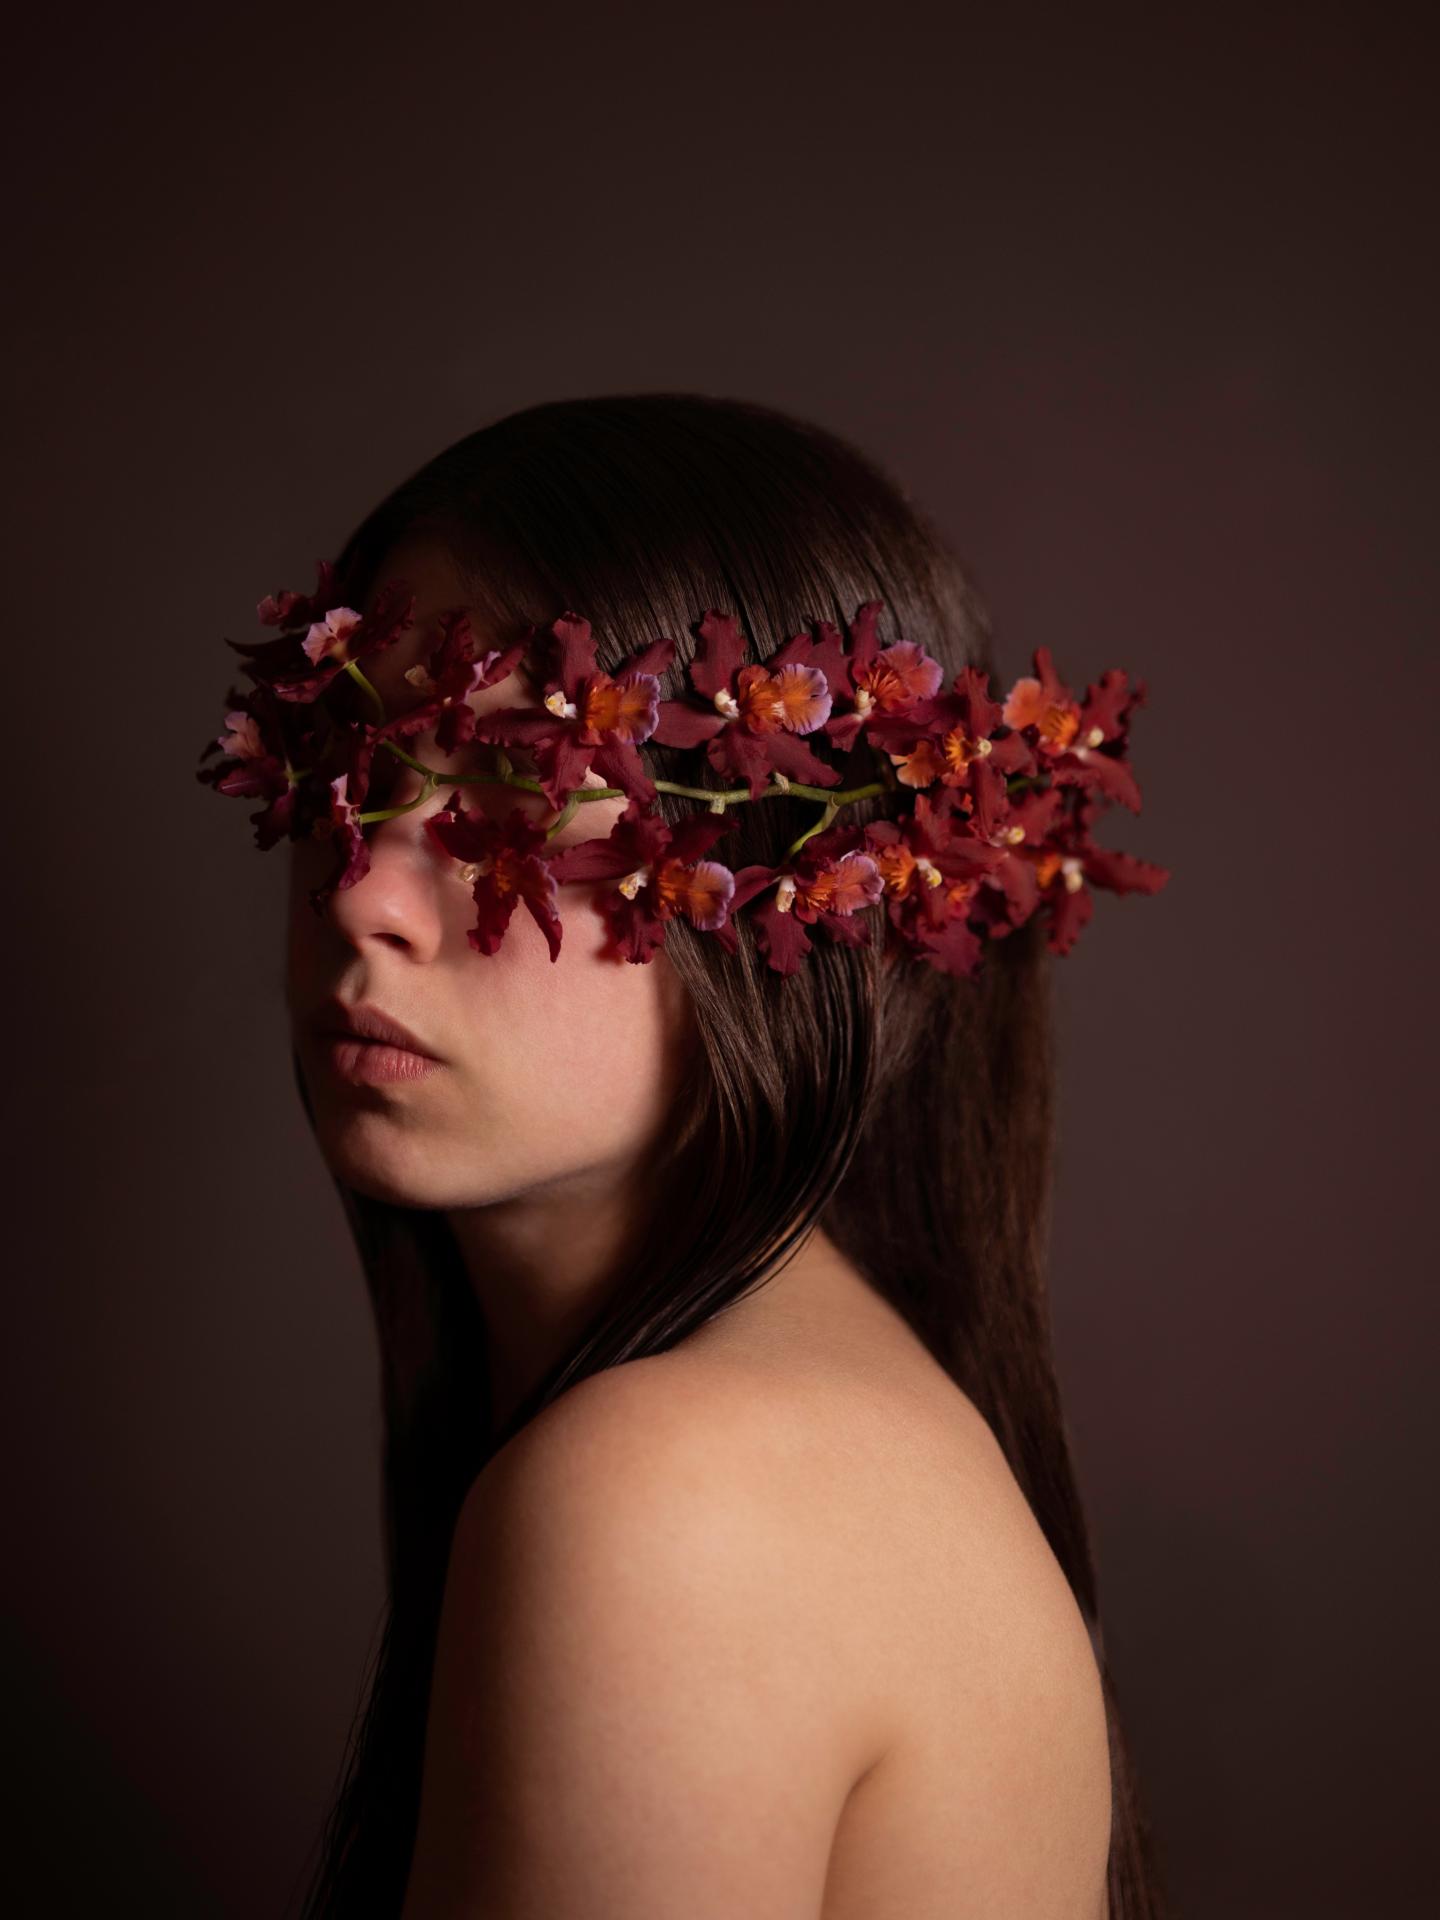 European Photography Awards Winner - Girl with red orchid